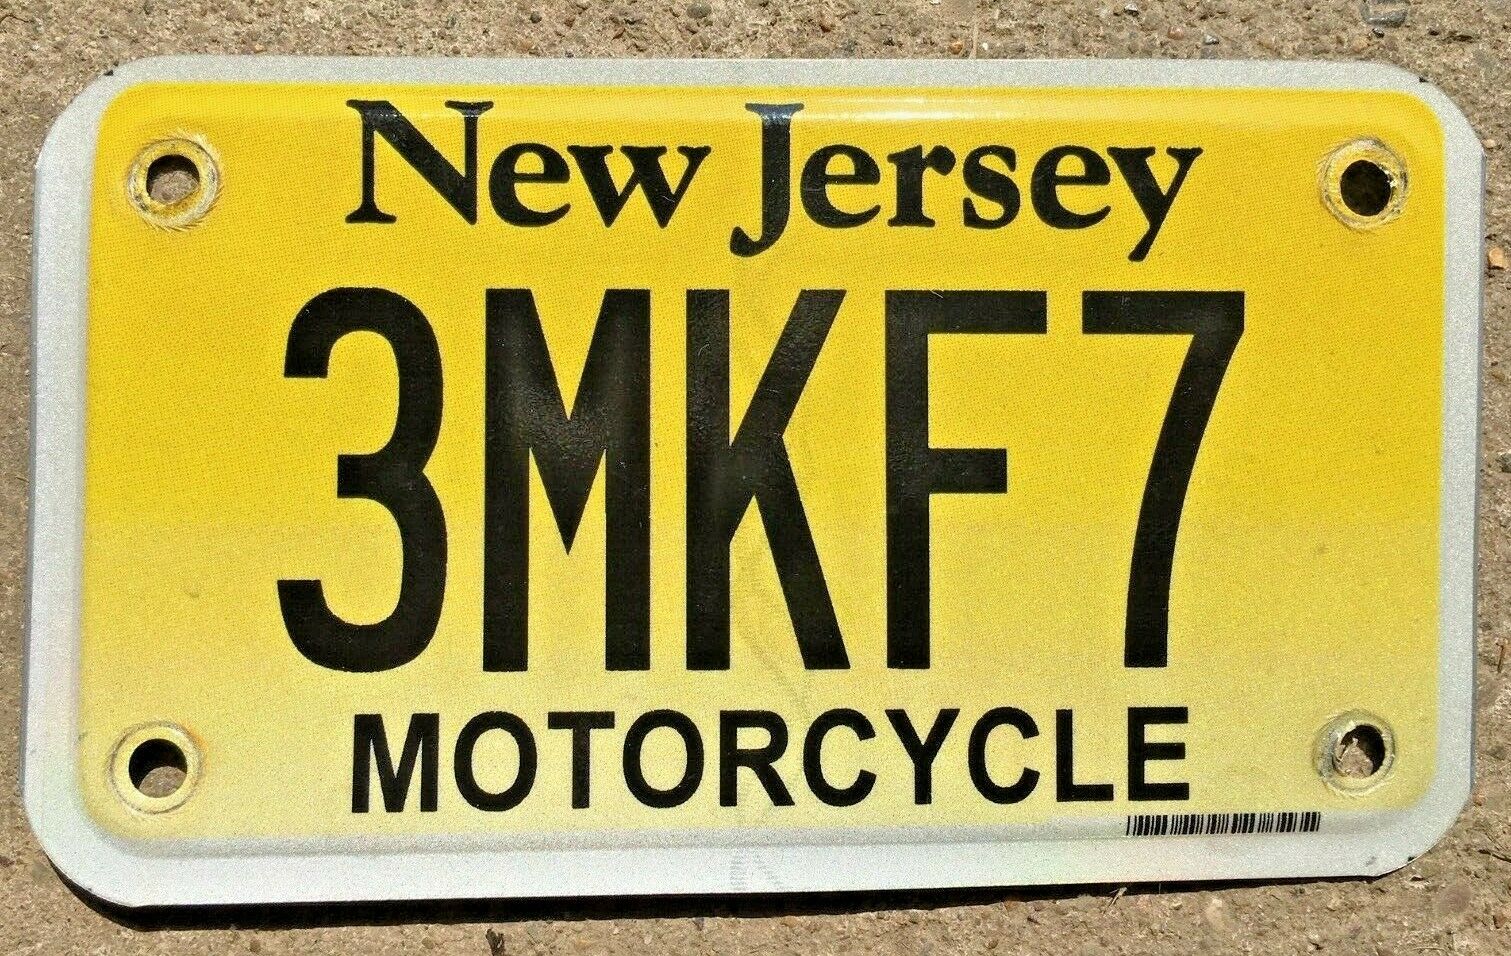 Price Reduced ! Cool Expired New Jersey Motorcycle License Plate 3 Mkf 7